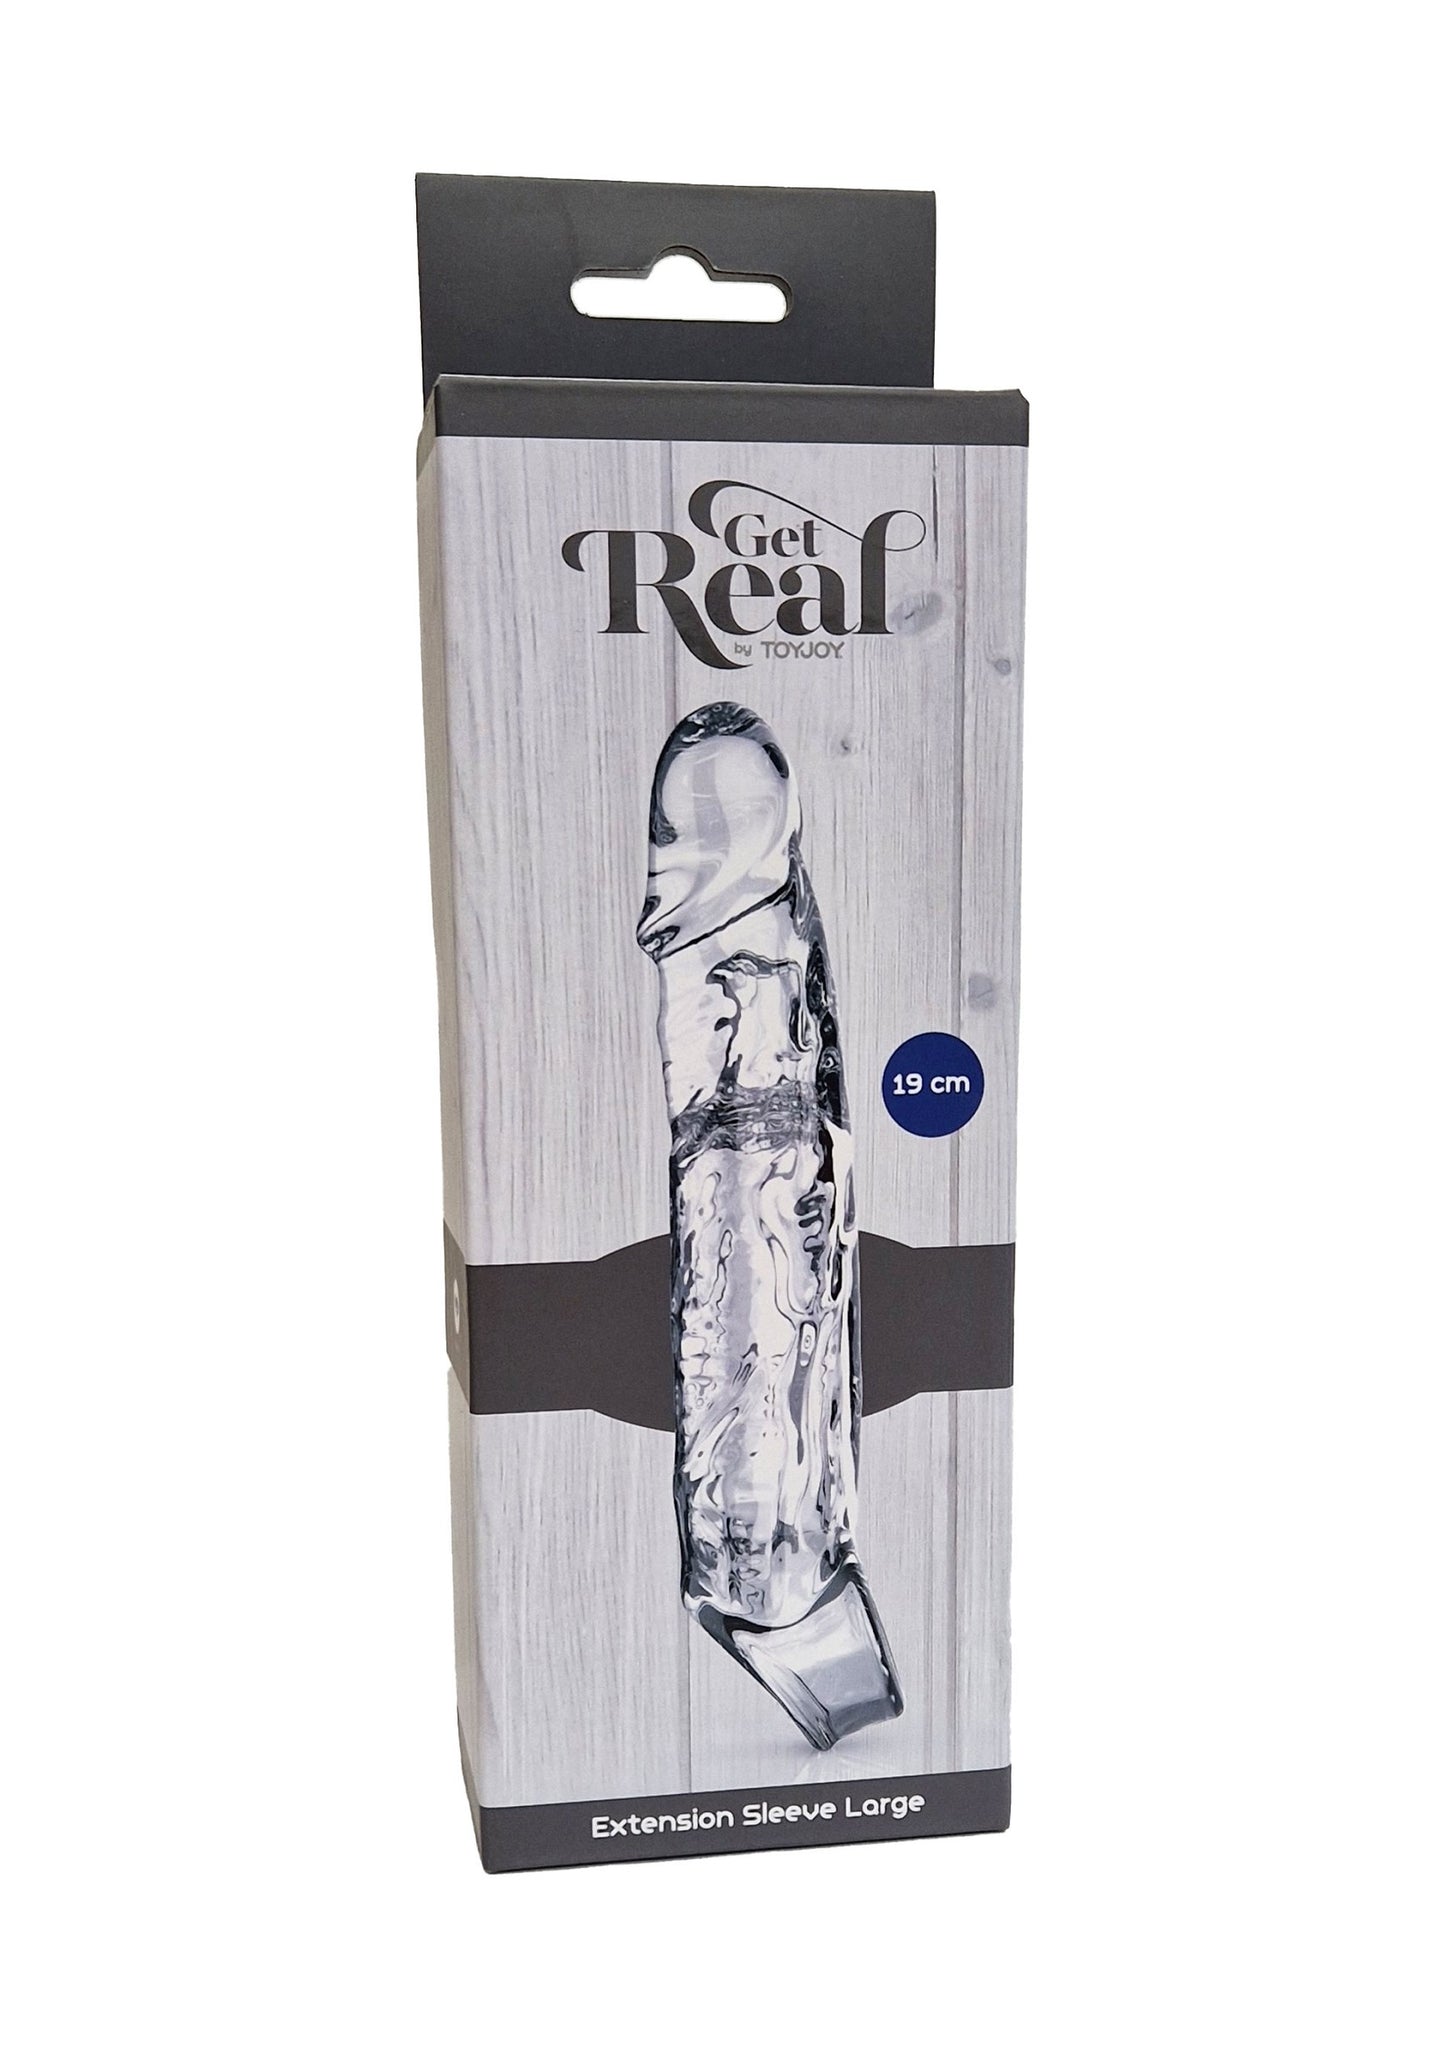 ToyJoy Get Real Extension Sleeve Large TRANSPA - 2